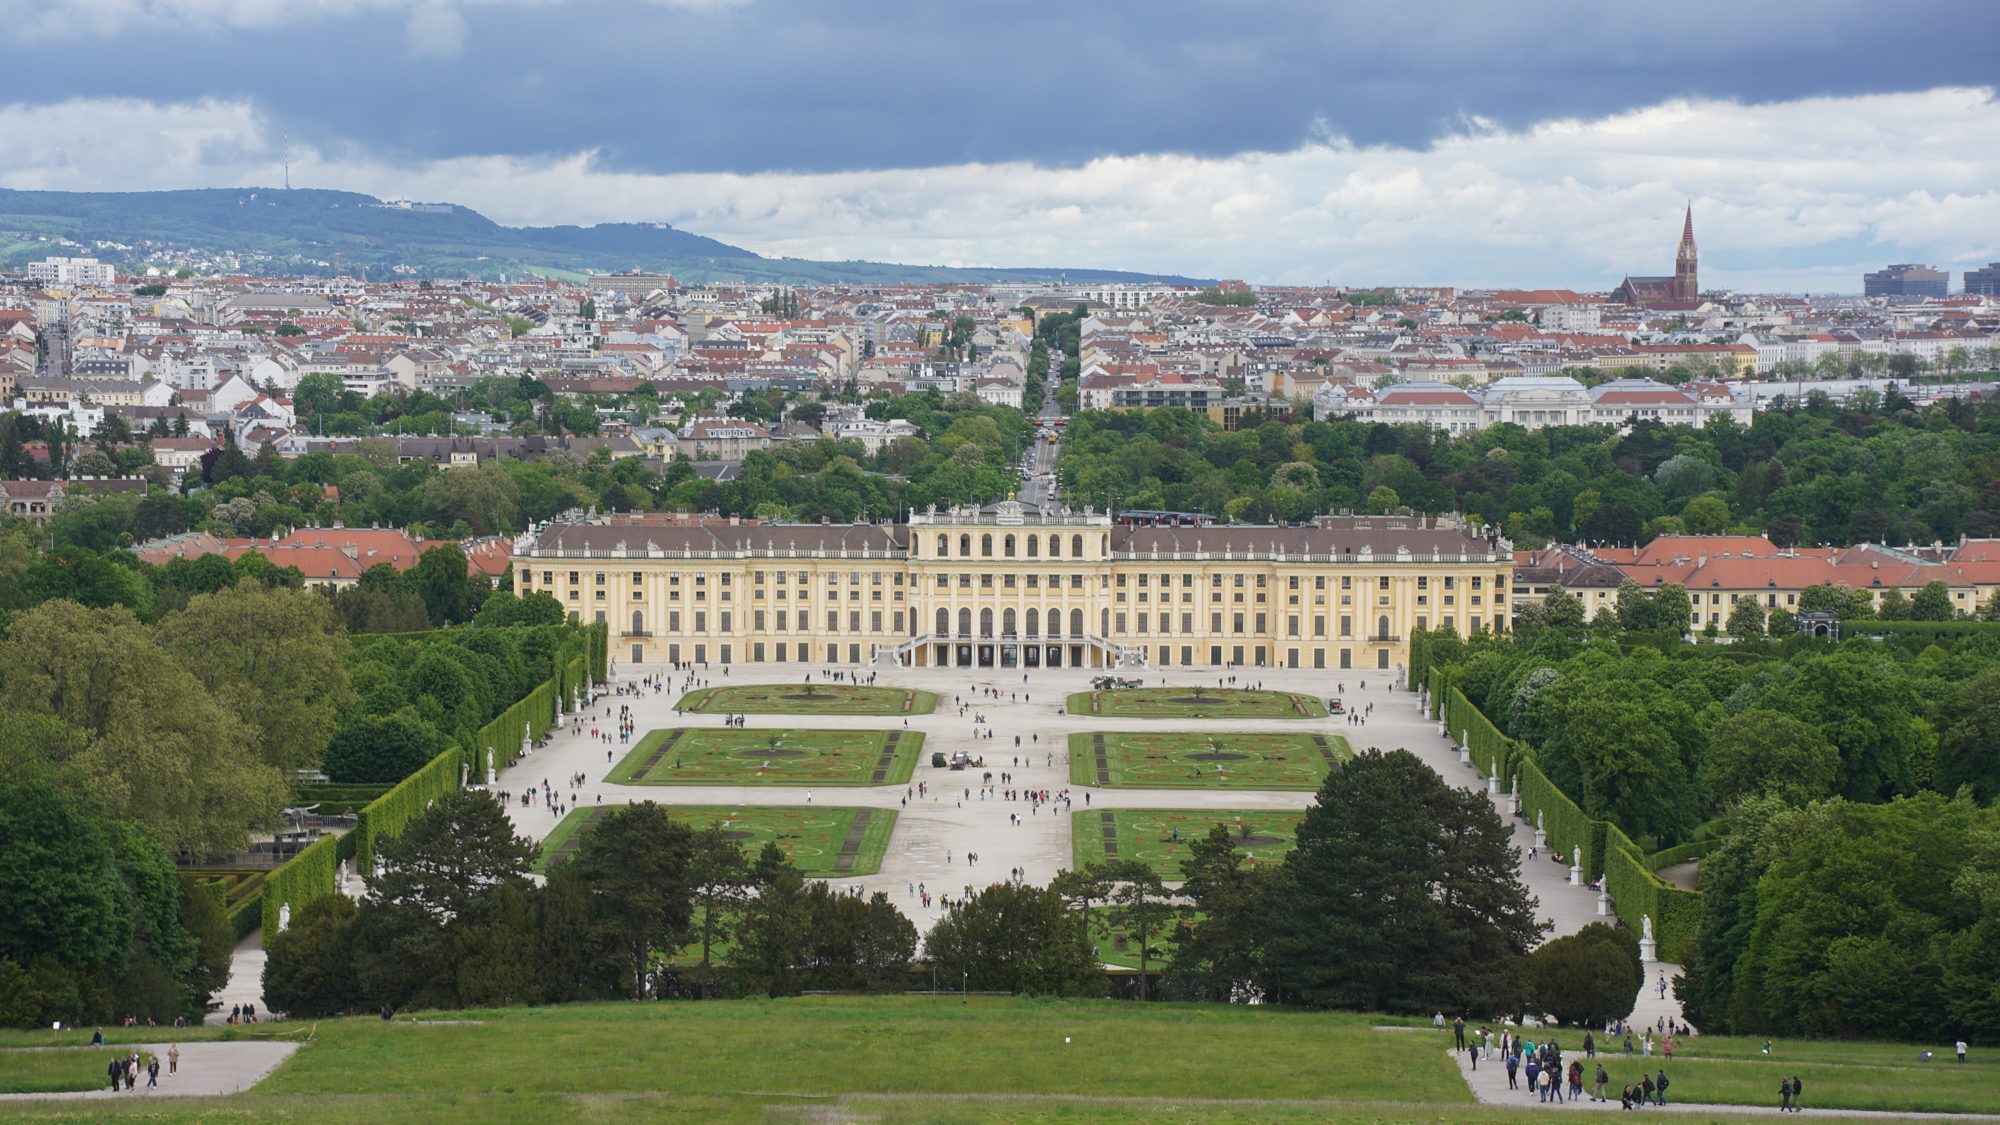 View of the gardens, the palace, and part of Vienna in the distance